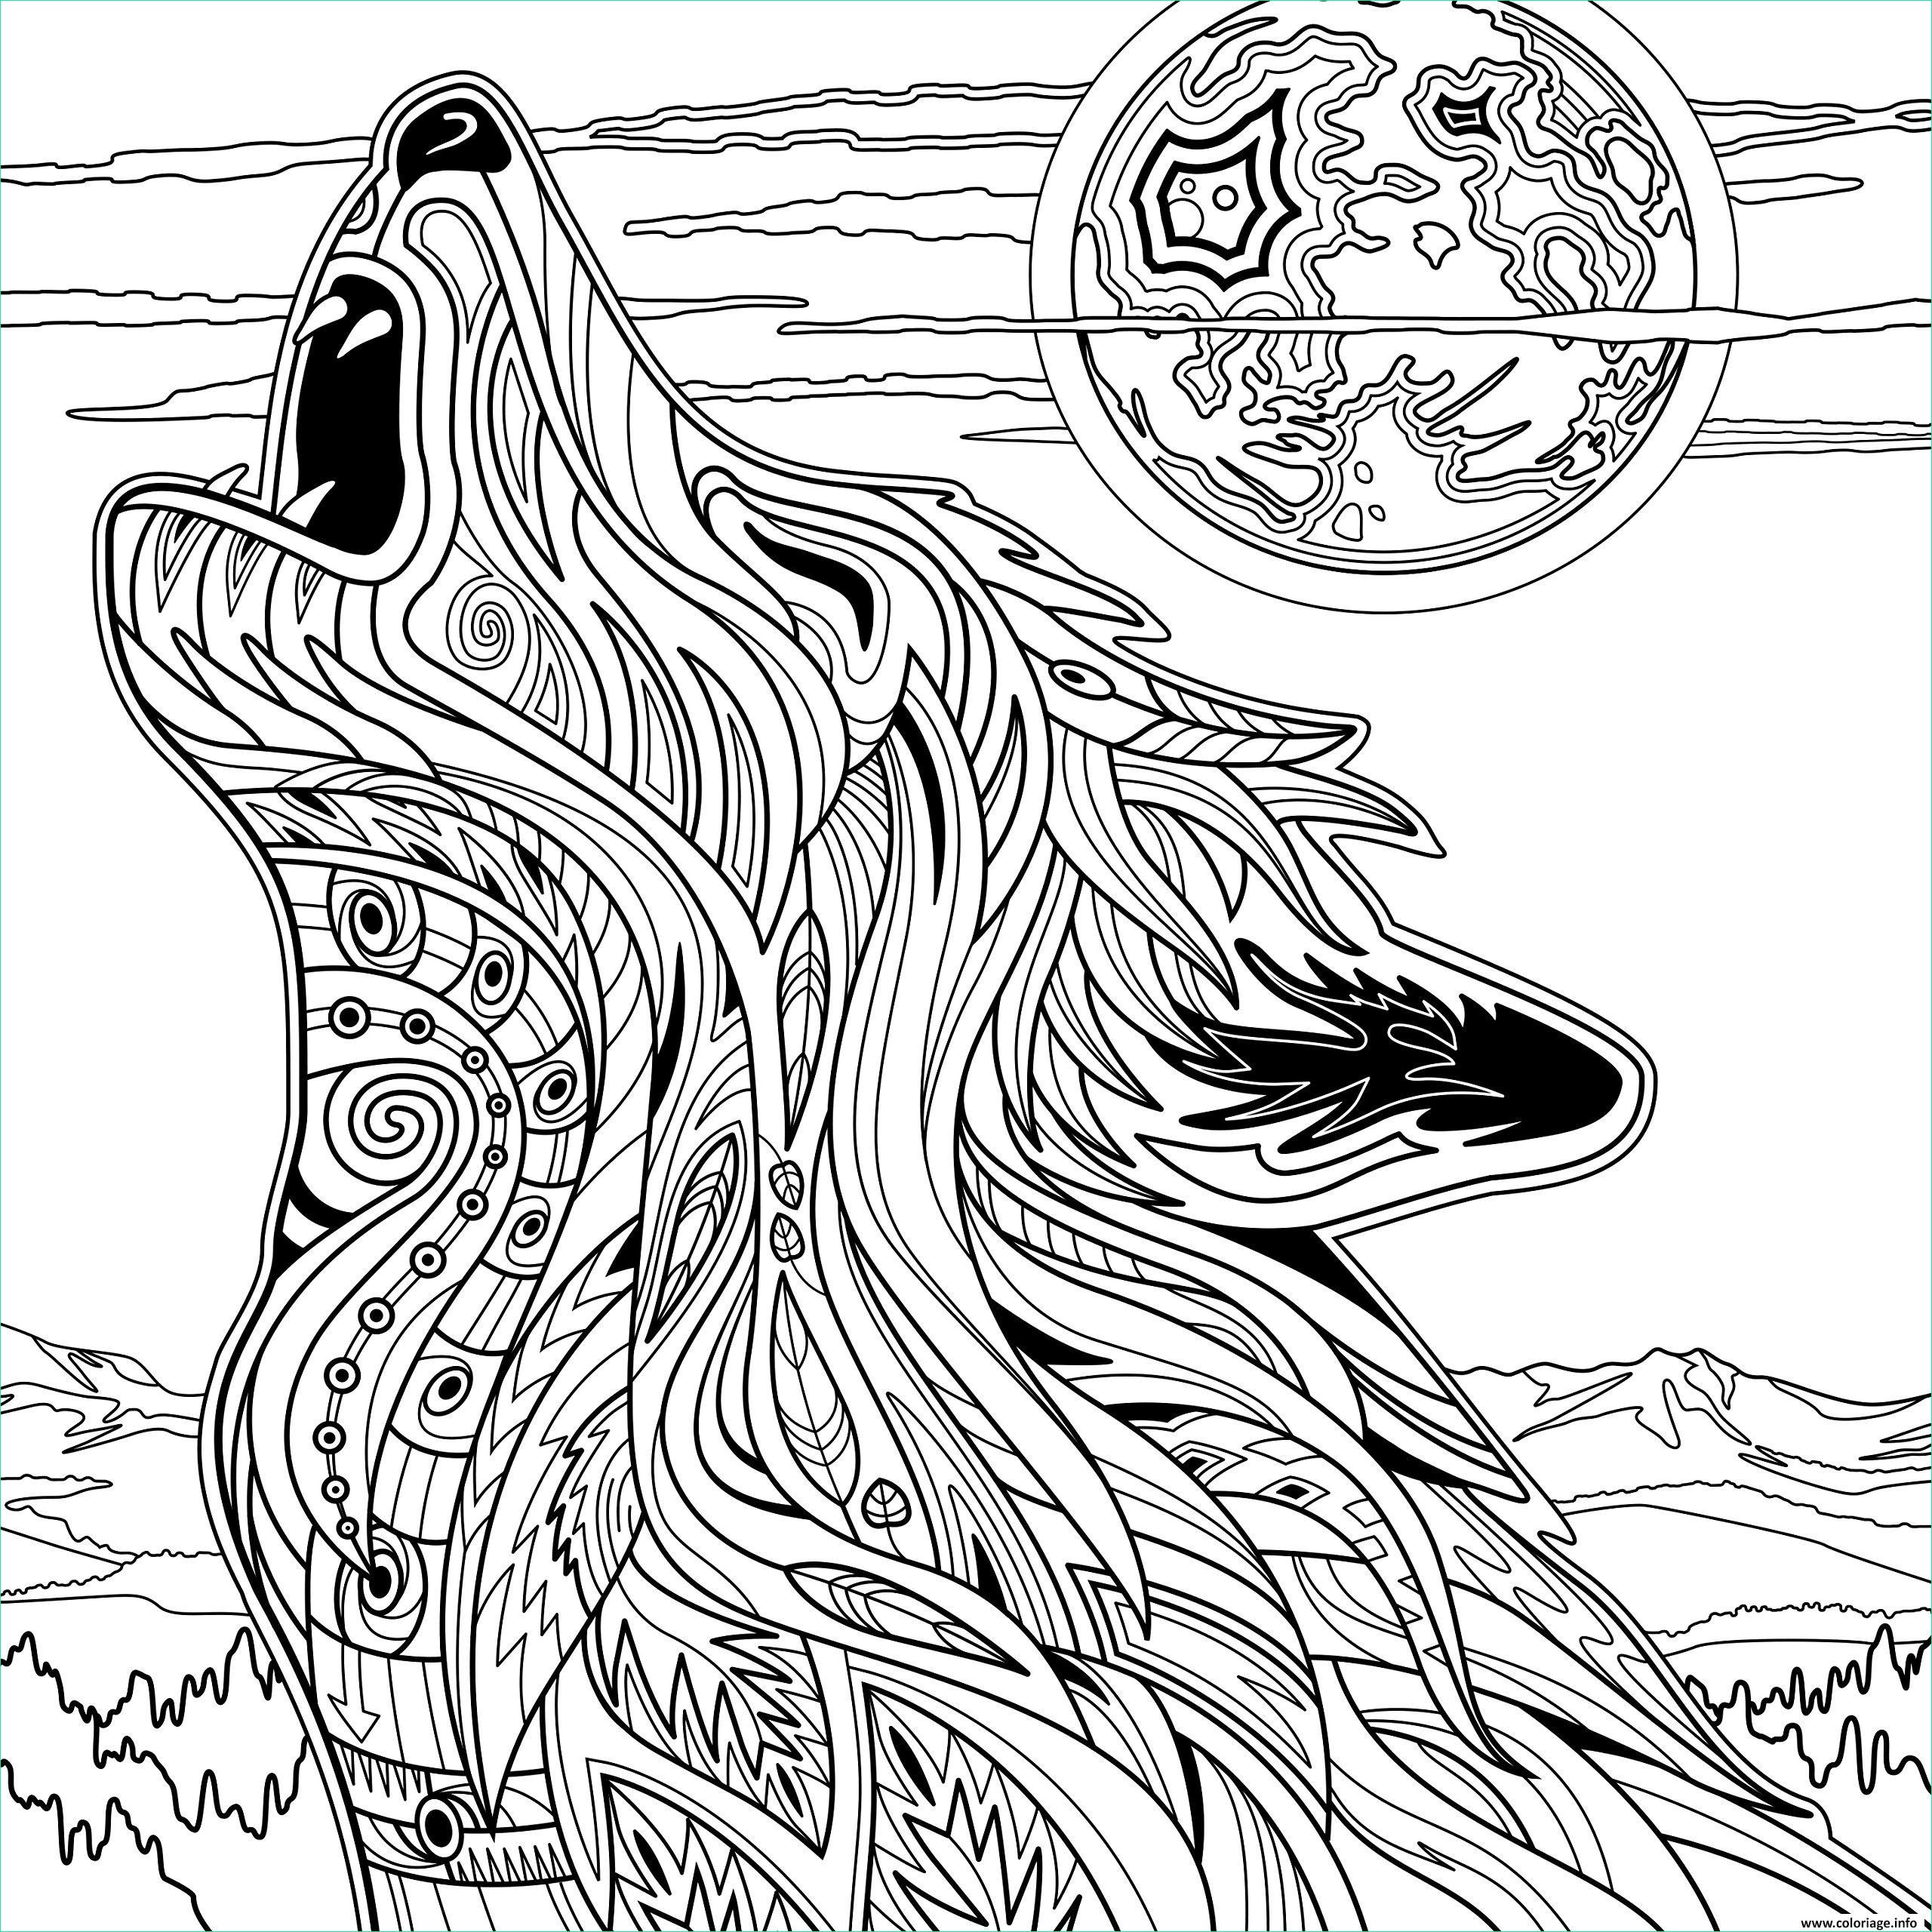 Dessin Animaux Mandala Luxe Galerie Coloriage Tigre Mandala Coloriage Mandala Animaux Loup